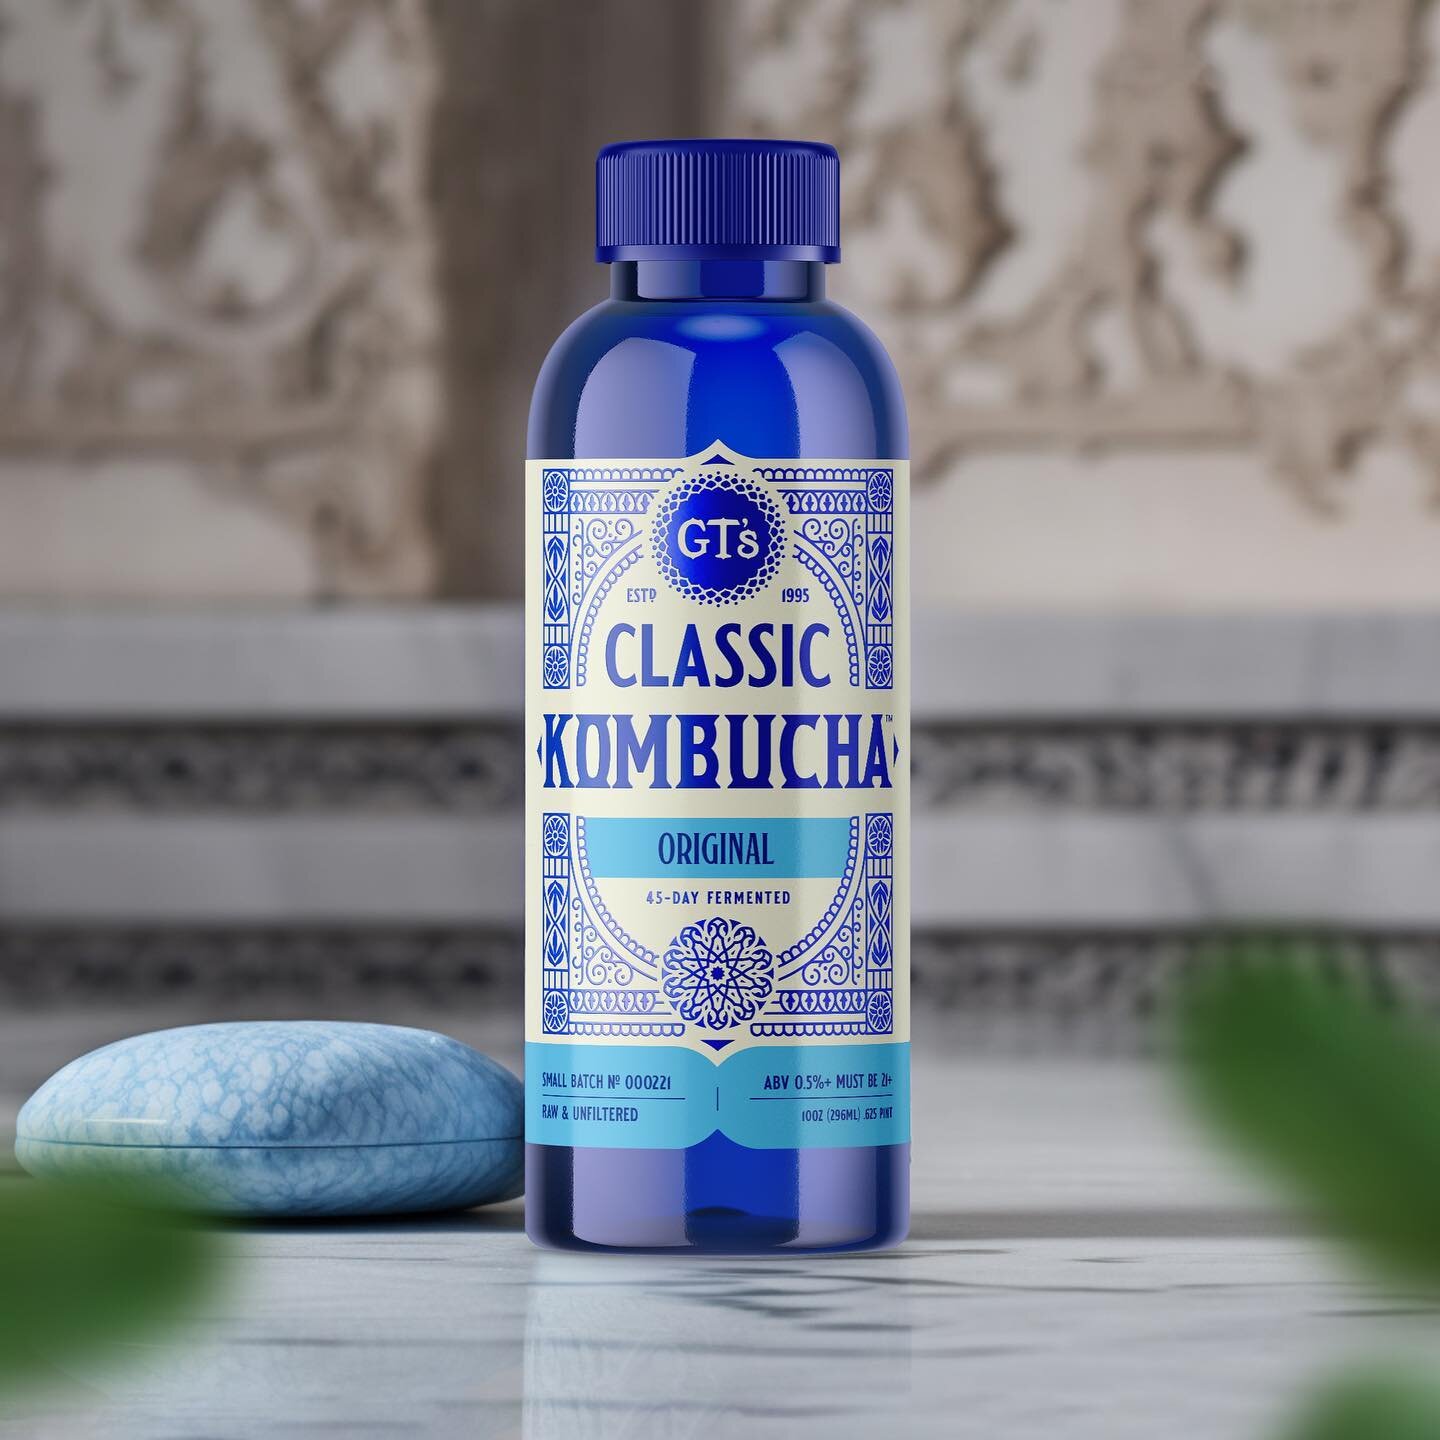 It was an honor reimagining the GT&rsquo;s Living Foods Classic Kombucha label. Classic is the original recipe GT began bottling in 1995 which launched the Kombucha category. It stays to true to how kombucha was crafted thousand of years ago. With ro